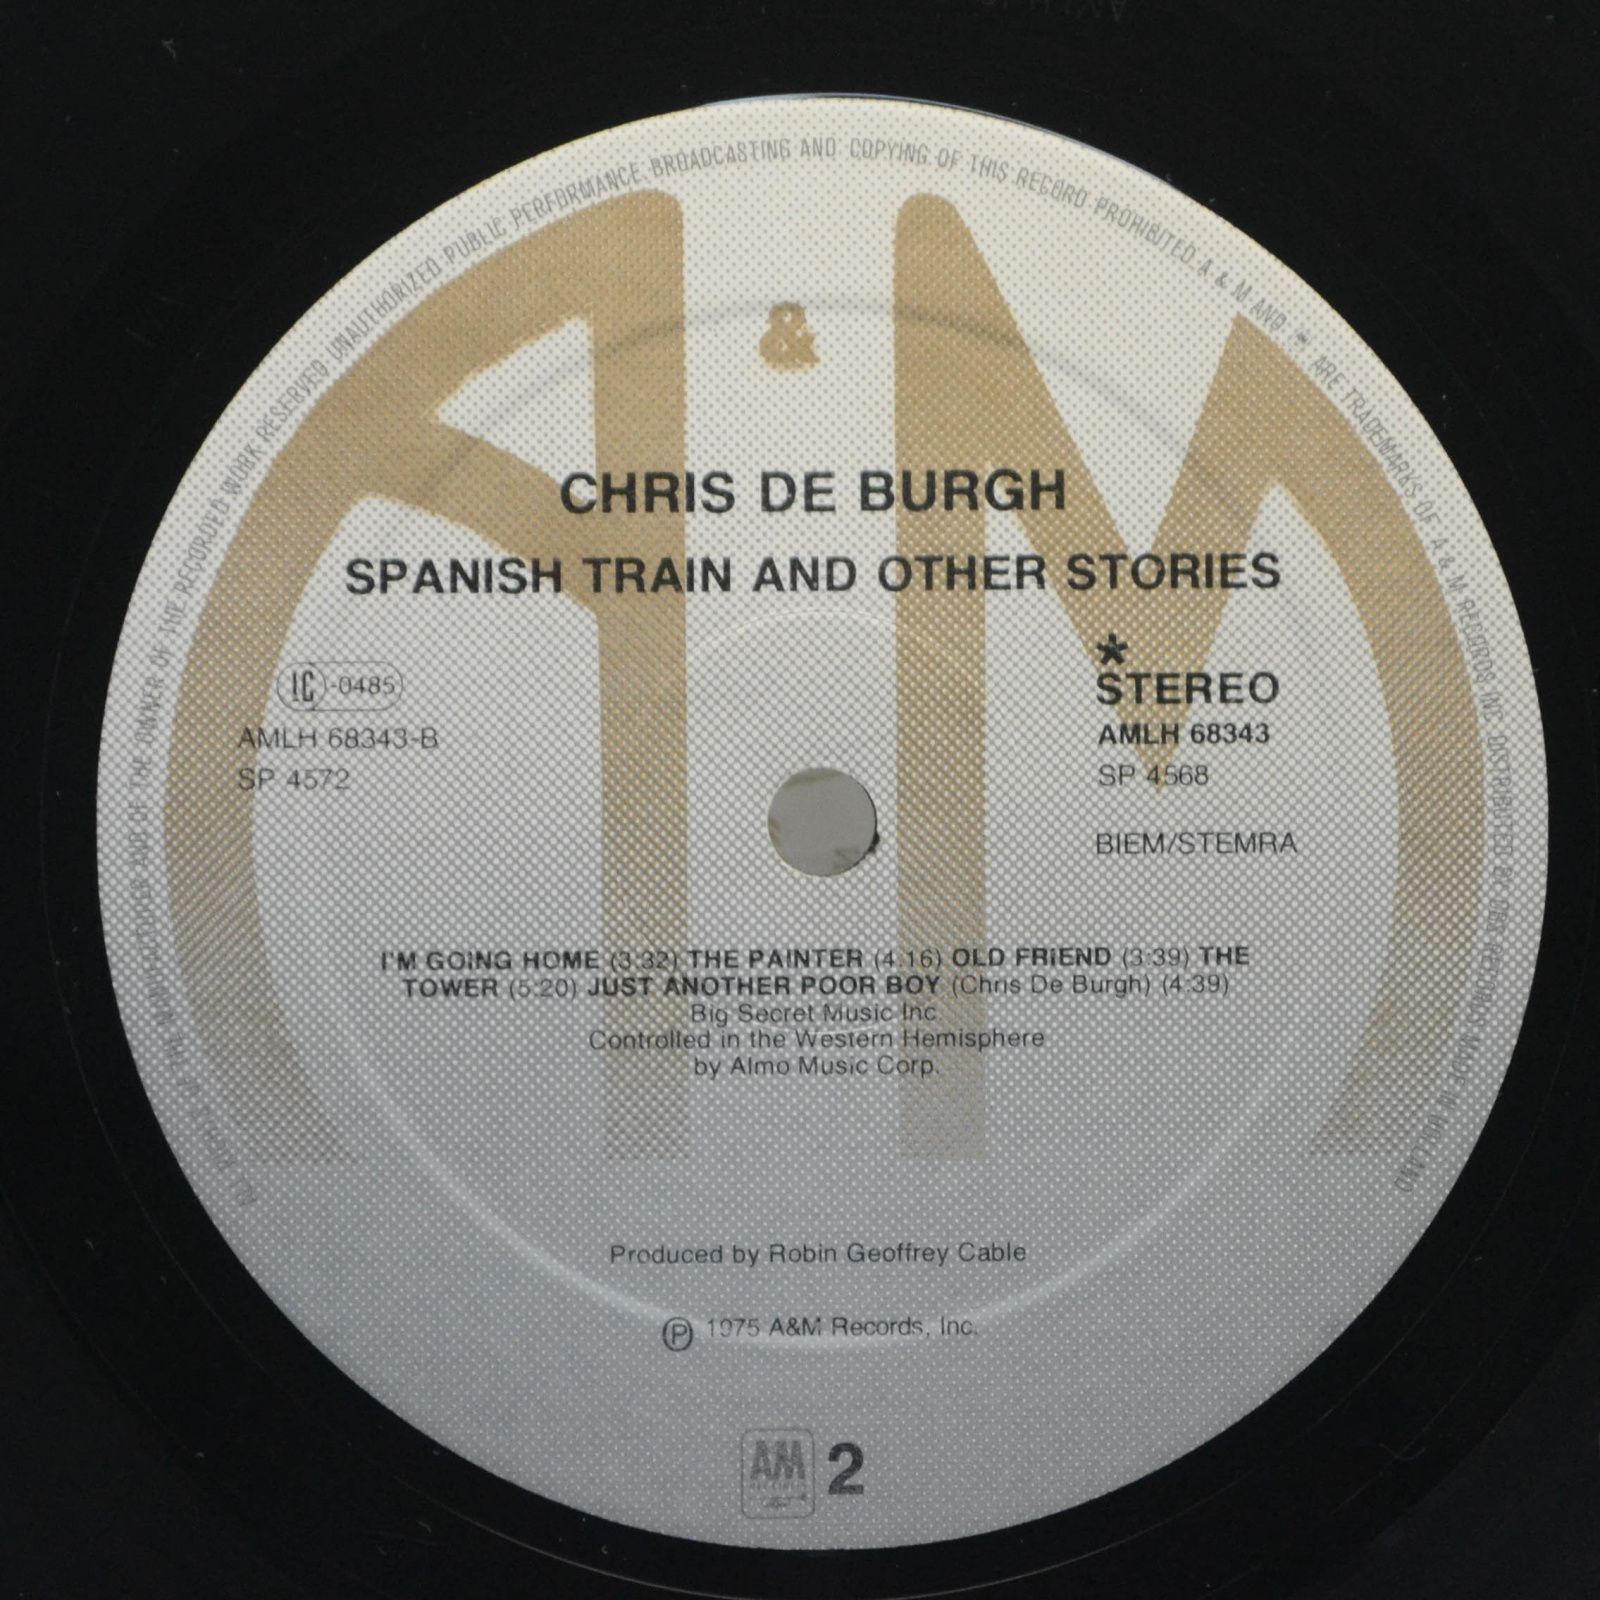 Chris de Burgh — Spanish Train And Other Stories, 1985